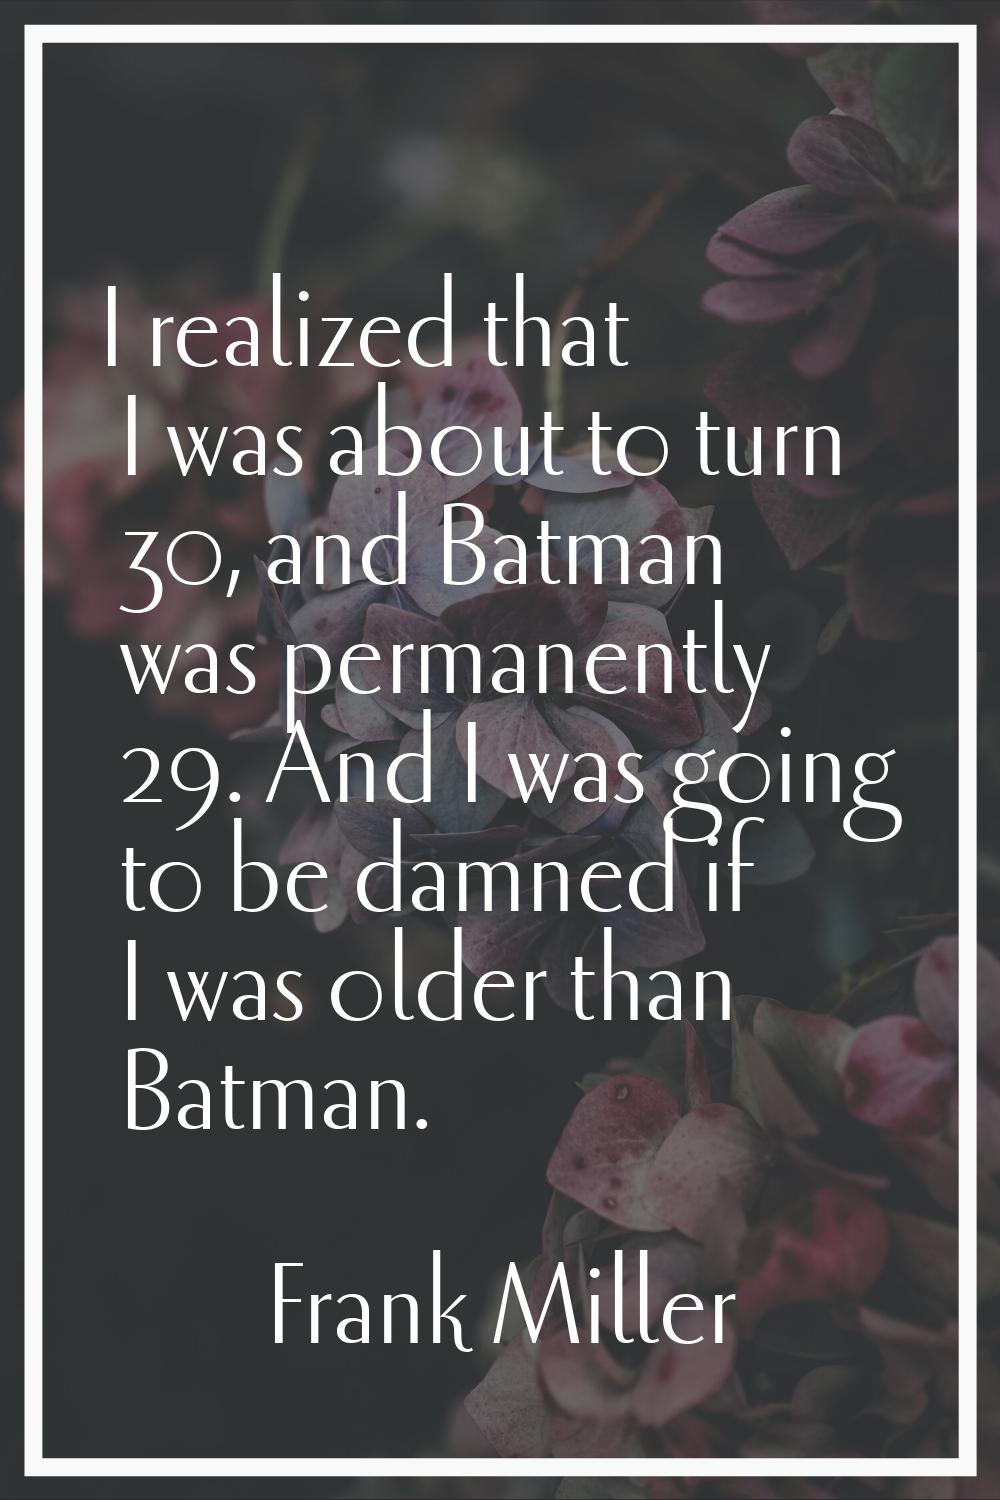 I realized that I was about to turn 30, and Batman was permanently 29. And I was going to be damned